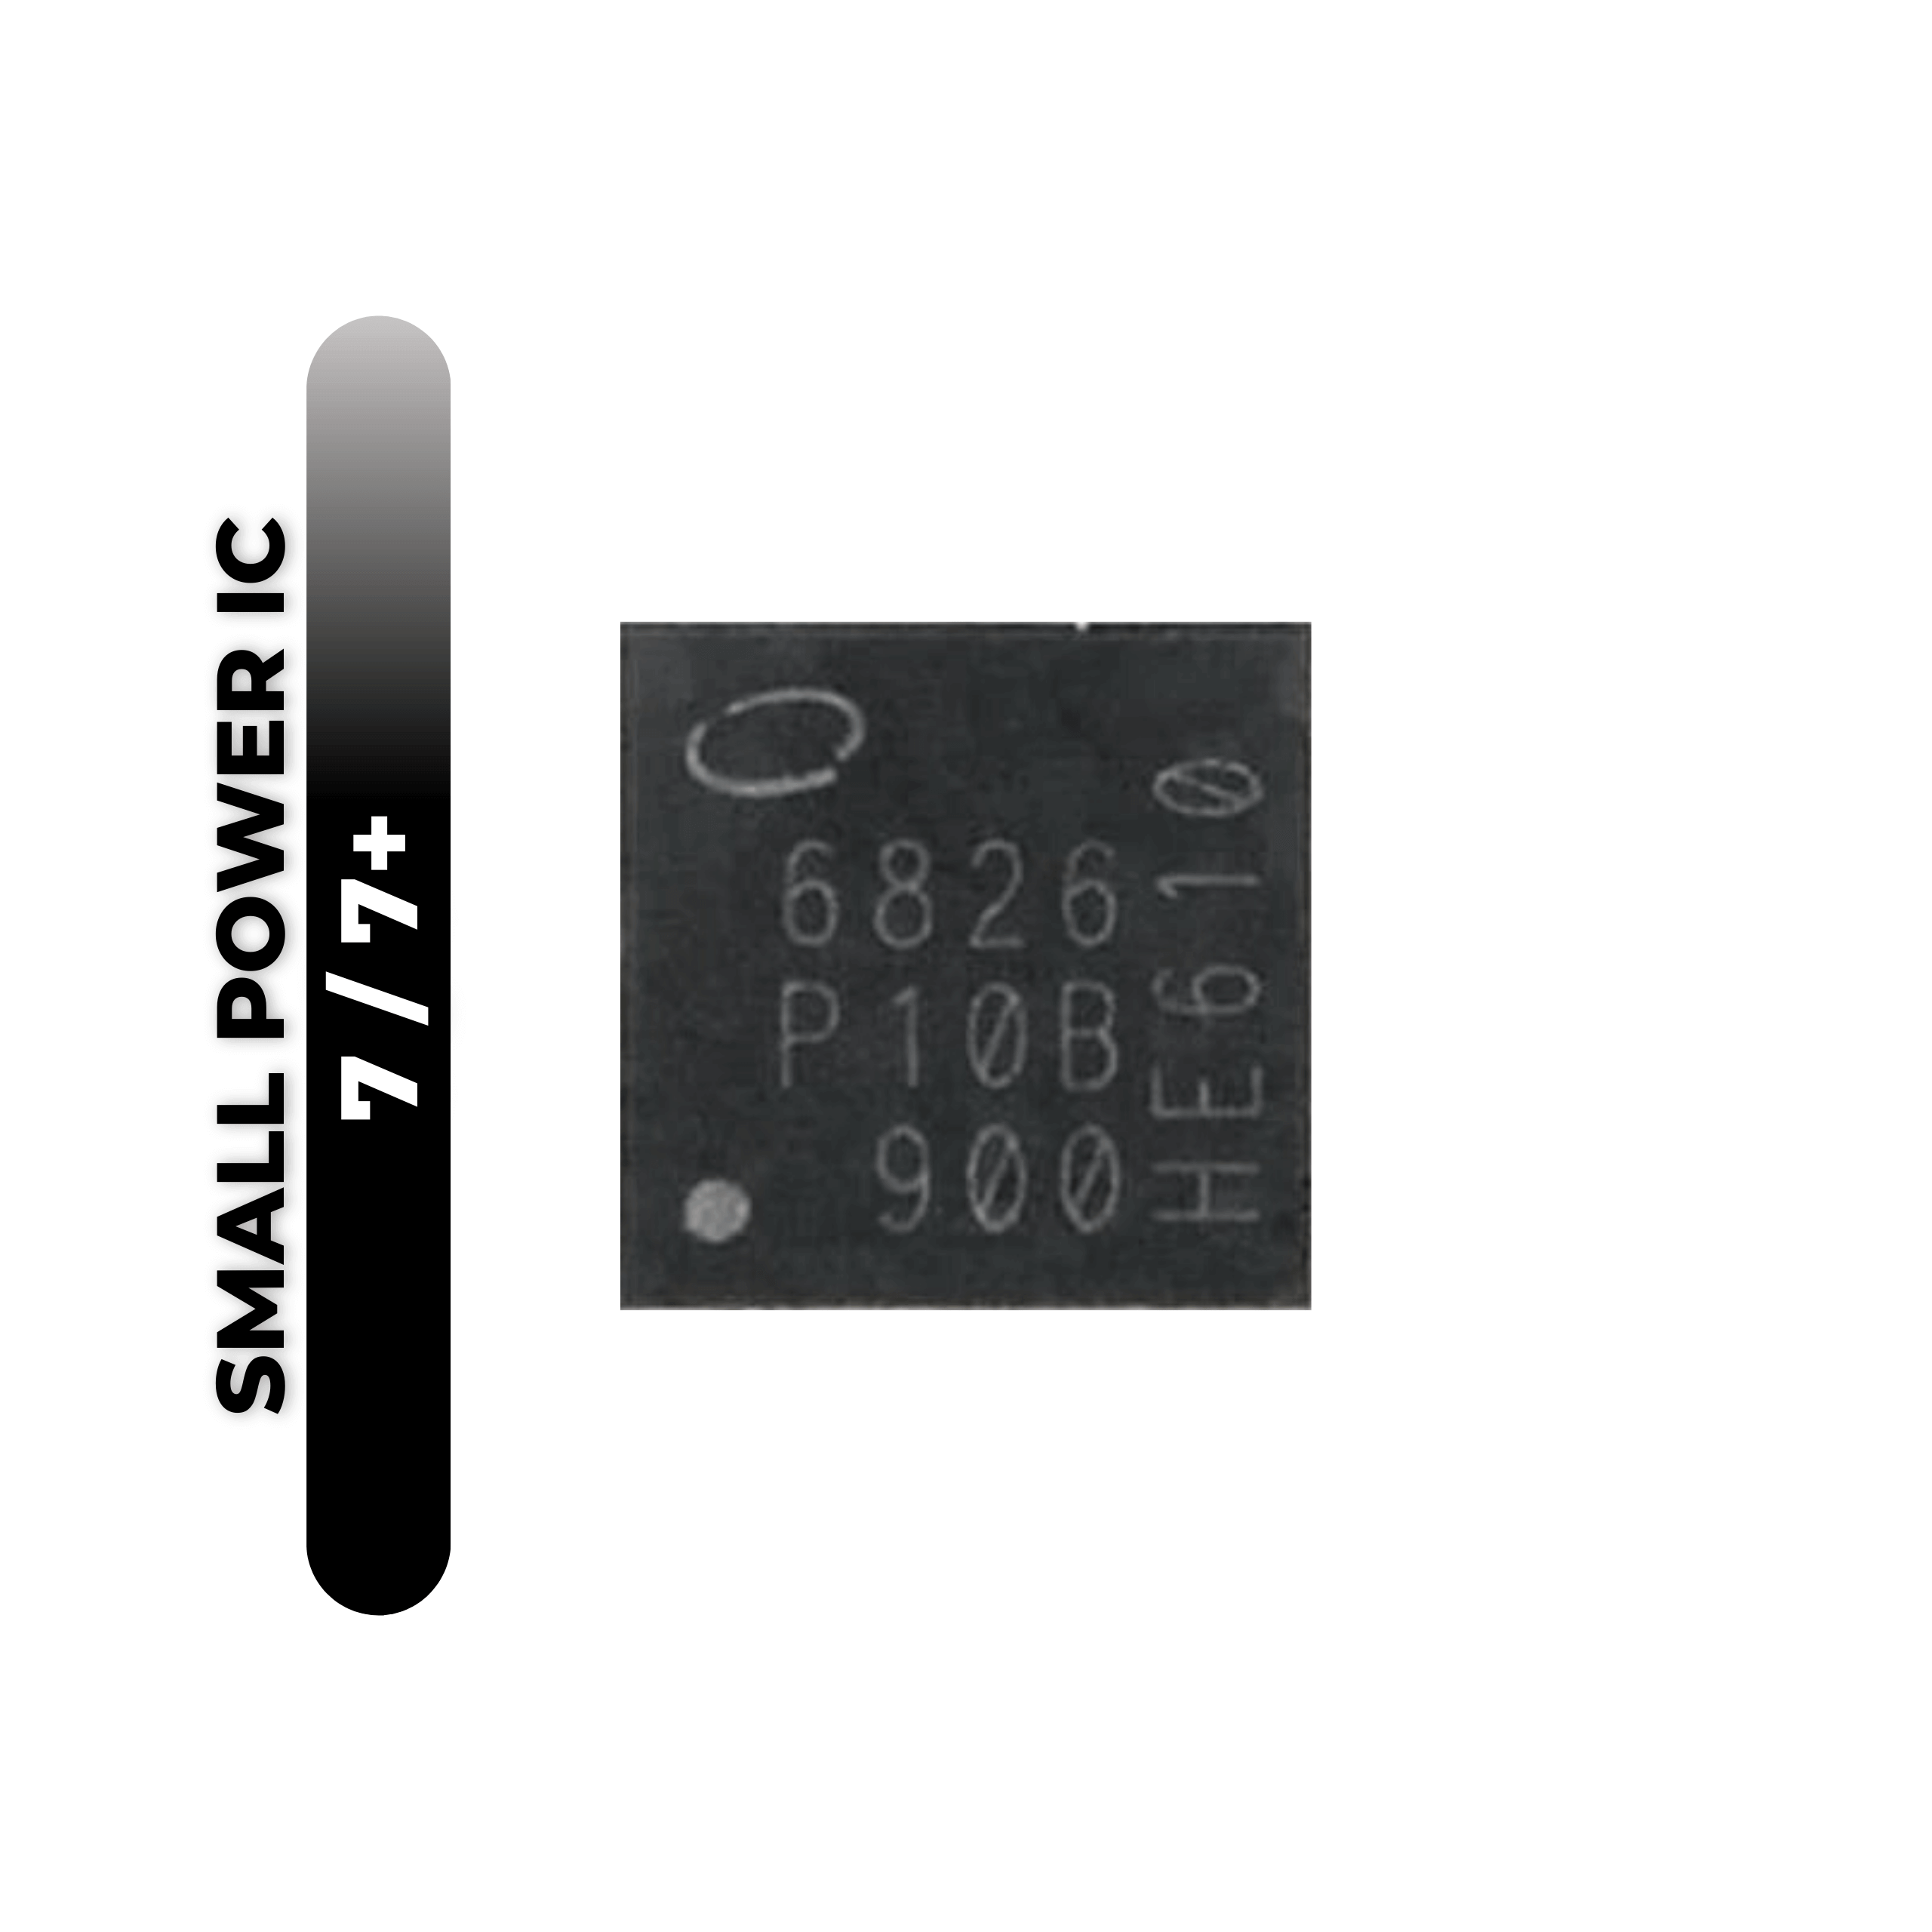 Small Power IC for iPhone 7 / iPhone 7 Plus (PMB6826) (Intel)